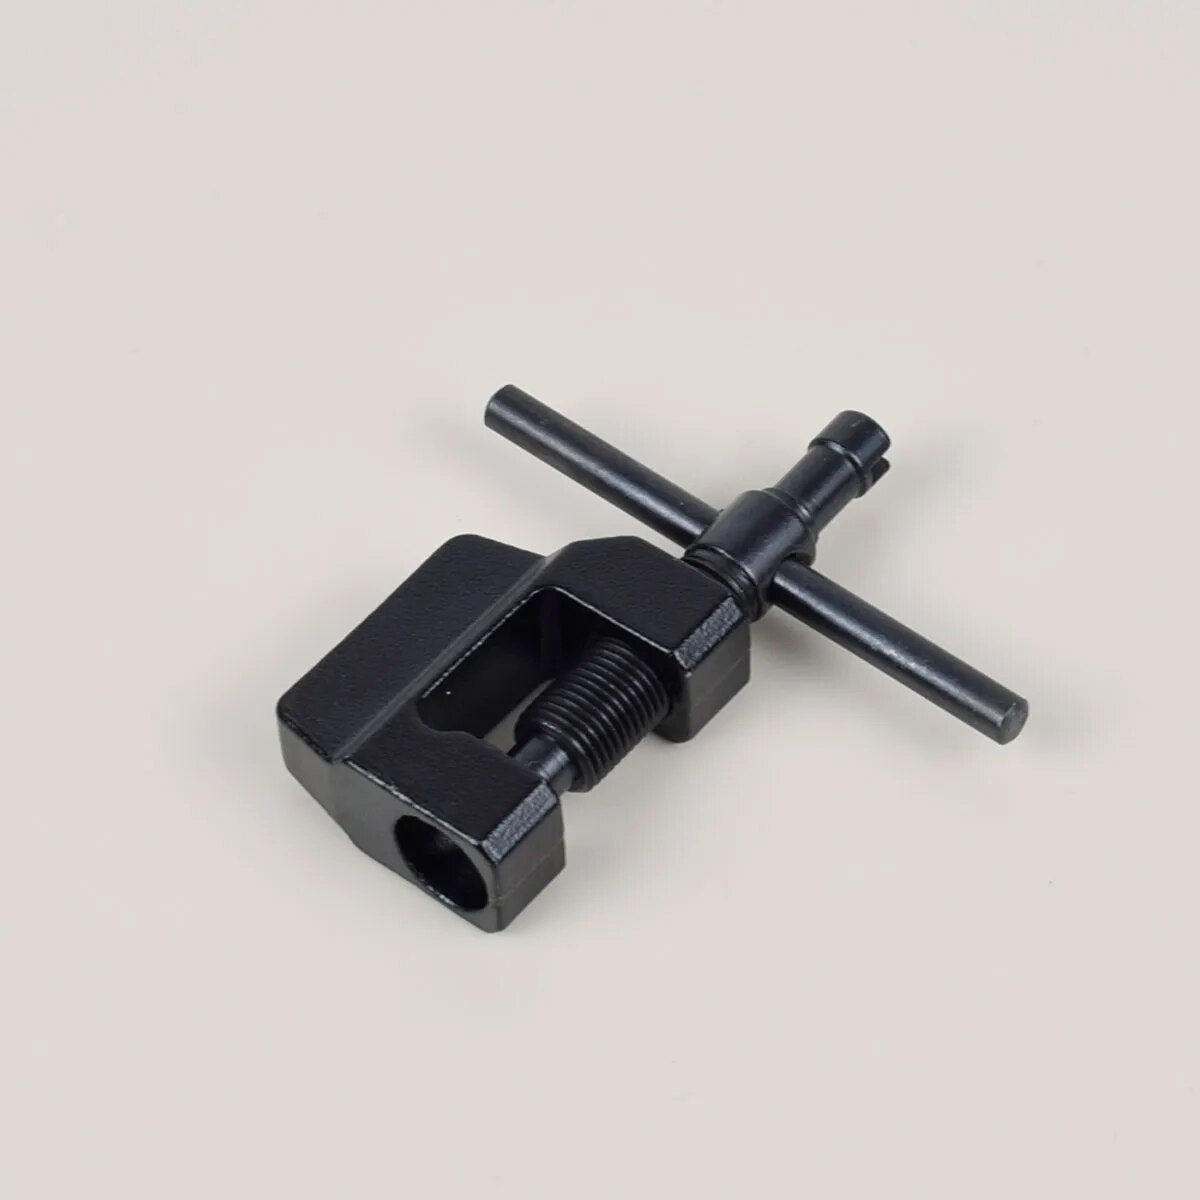 Front Sight Tool Adjustment for AK47 AK74 SKS